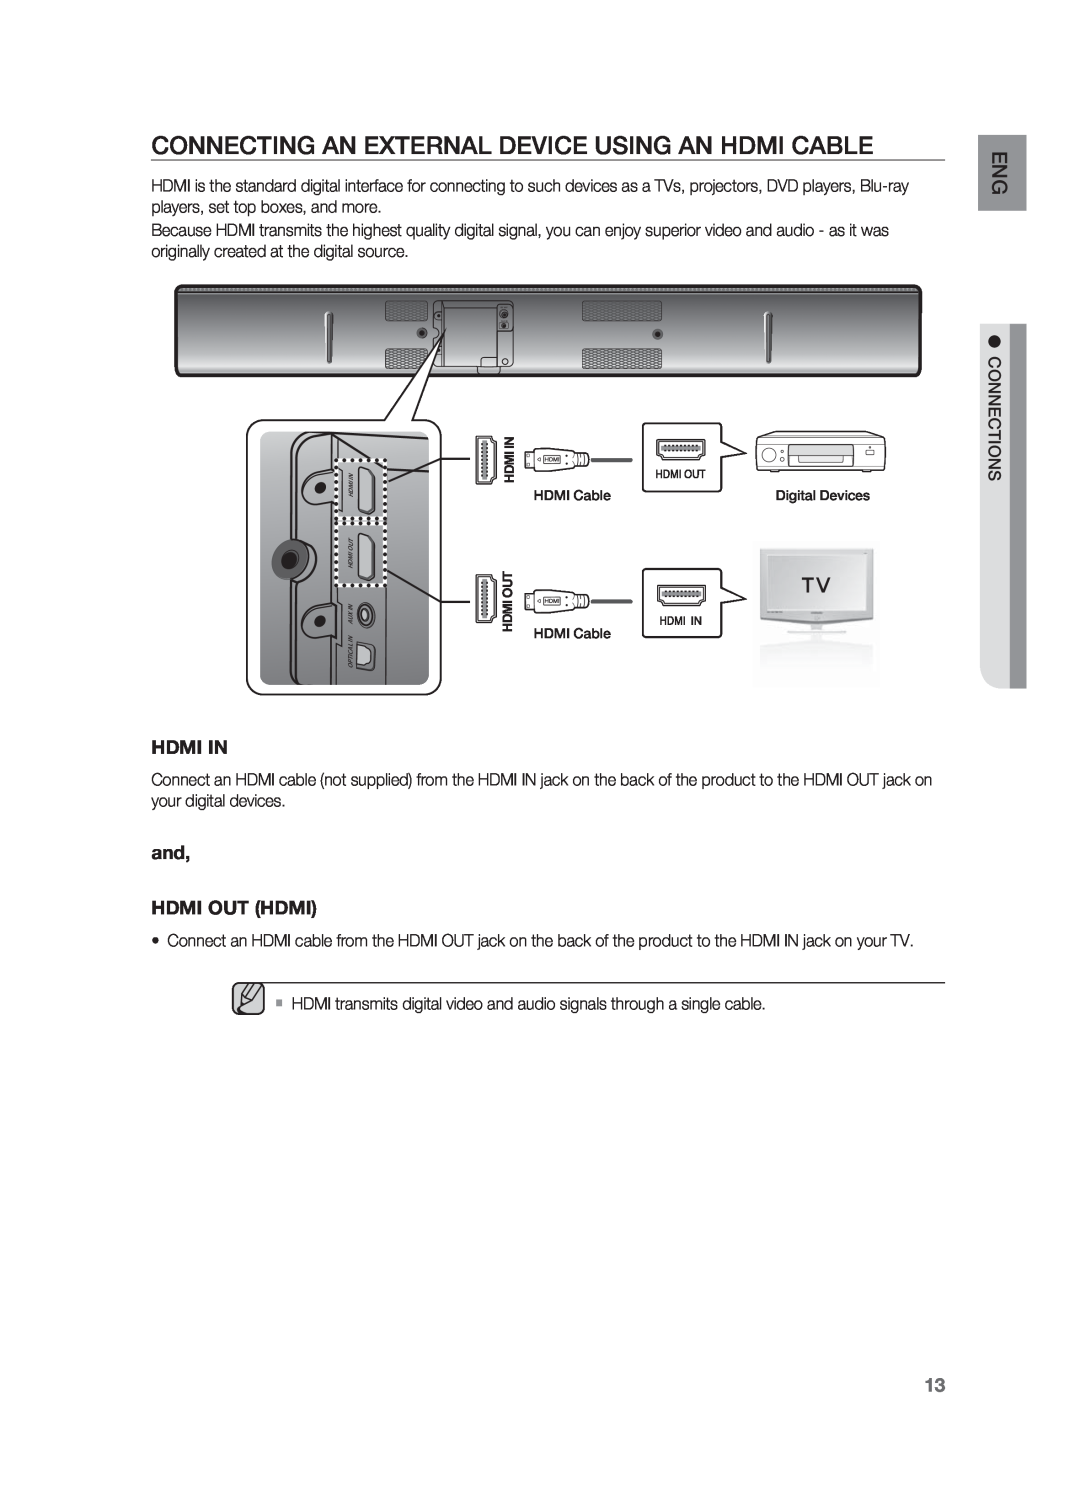 Samsung HW-F850/ZA user manual Connecting An External Device Using An Hdmi Cable, Hdmi In, and HDMI OUT HDMI 